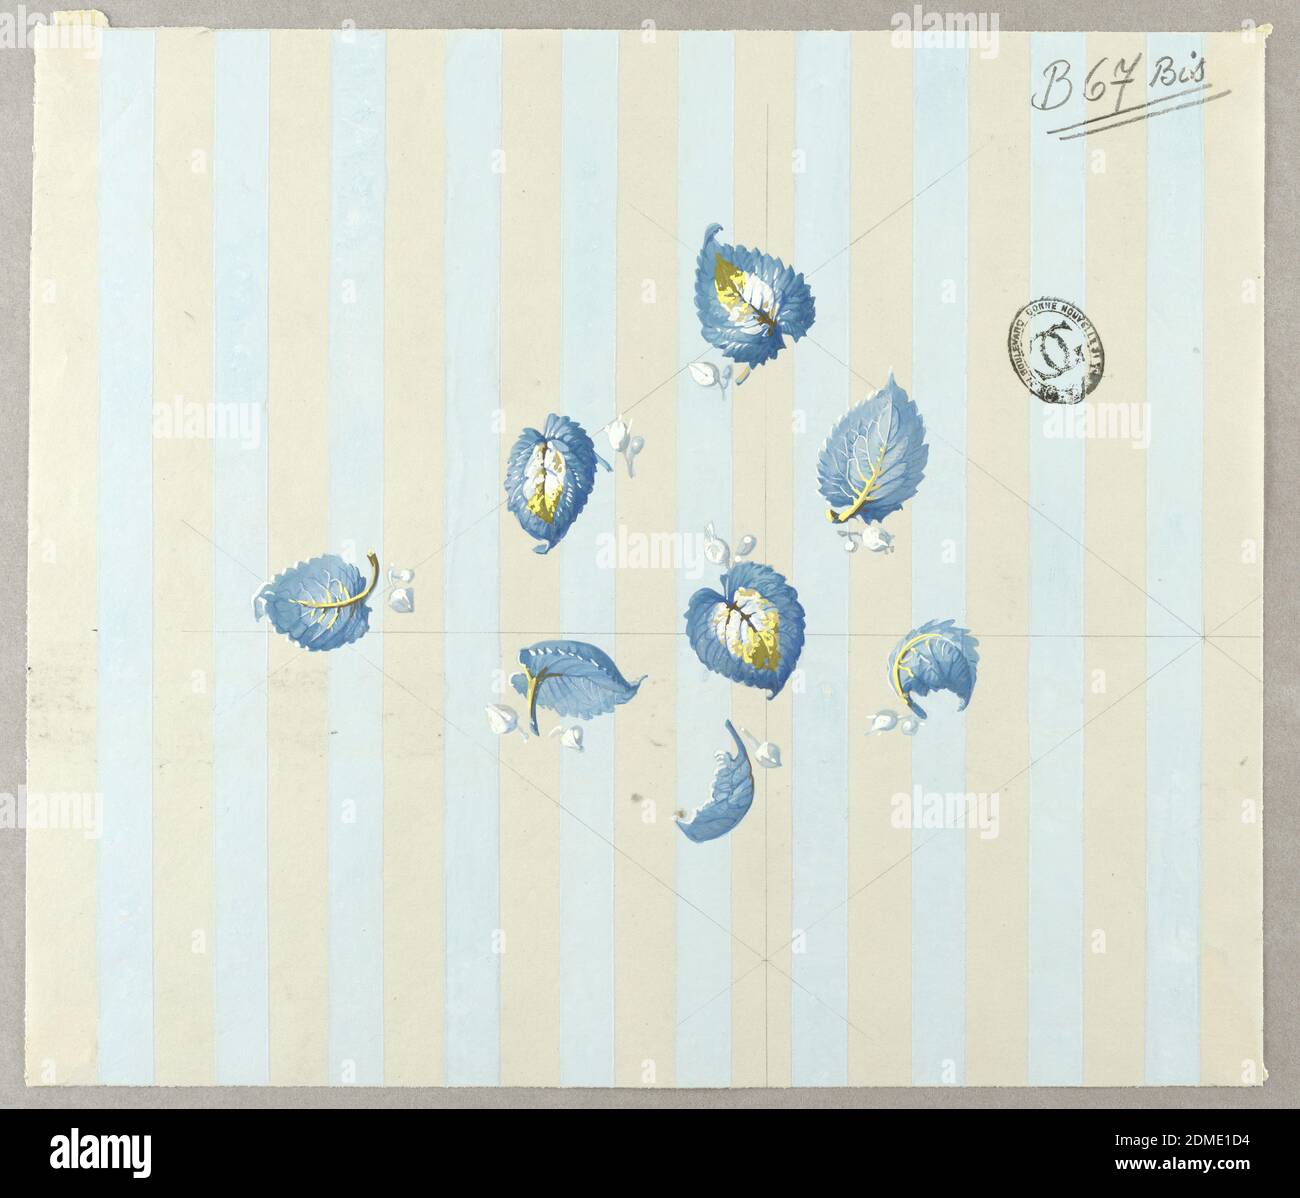 Design for Wallpaper and Textiles: Flowers, Brush and gouache, graphite on cream paper, Guidelines in graphite are visible on the page with the diamond bisected horizontally and vertically. On light blue and white vertically striped ground. Blue leaves in center diamond with yellow stems and centers, all facing different directions. Each leaf has two smaller light blue leaves at its base., France, 19th century, wallpaper designs, Drawing Stock Photo